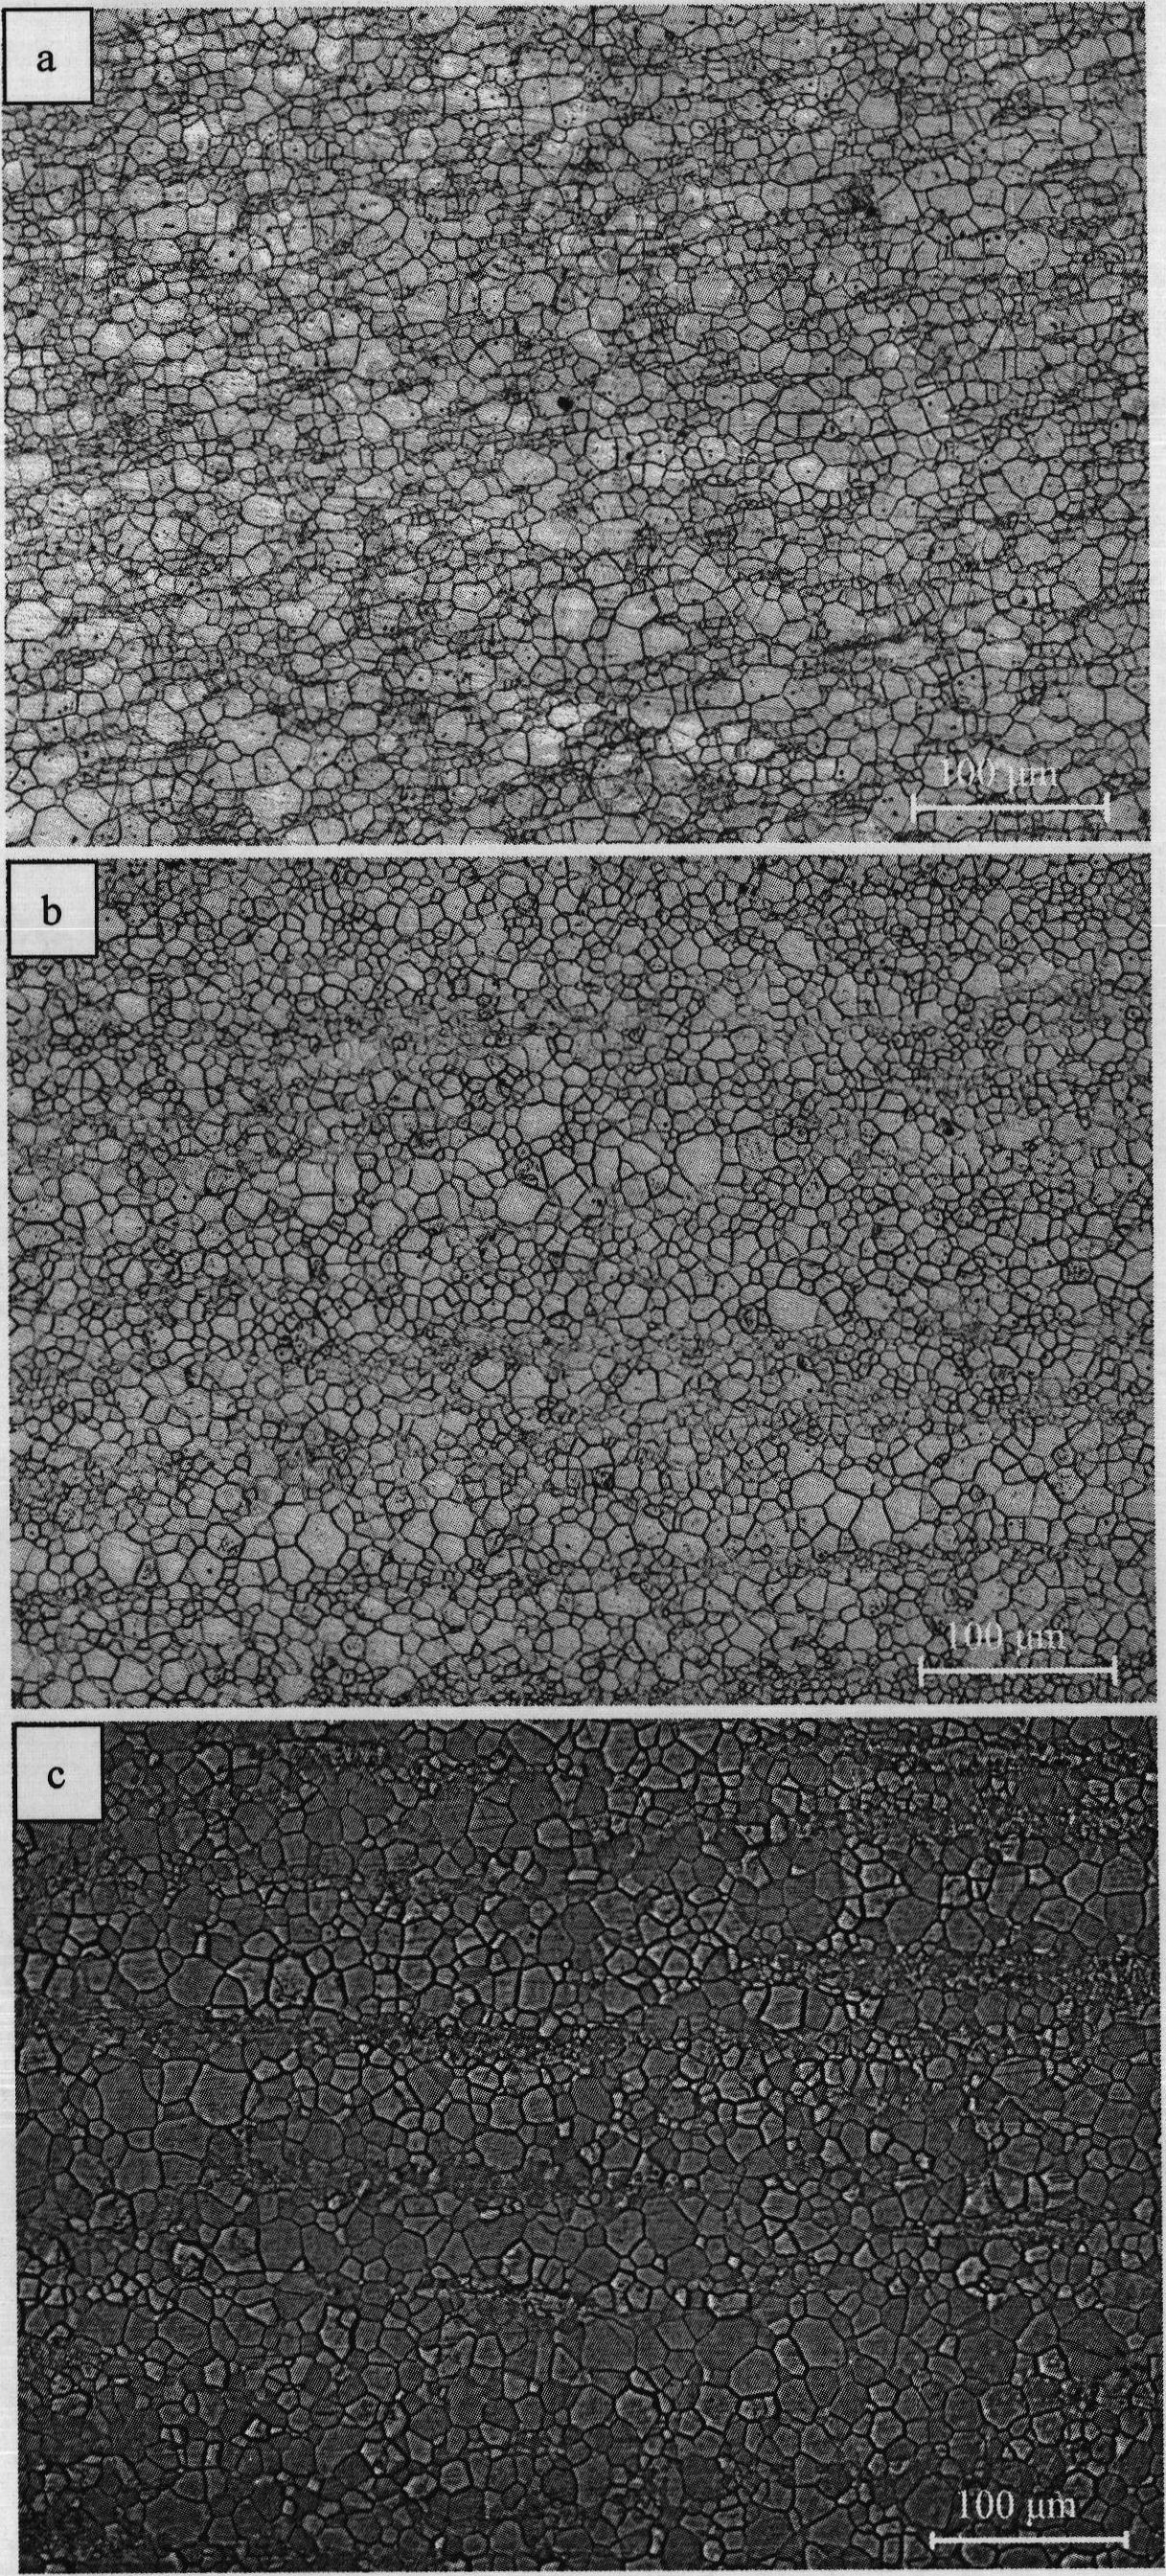 Extrusion deformation process of high-strength magnesium alloy thick plate